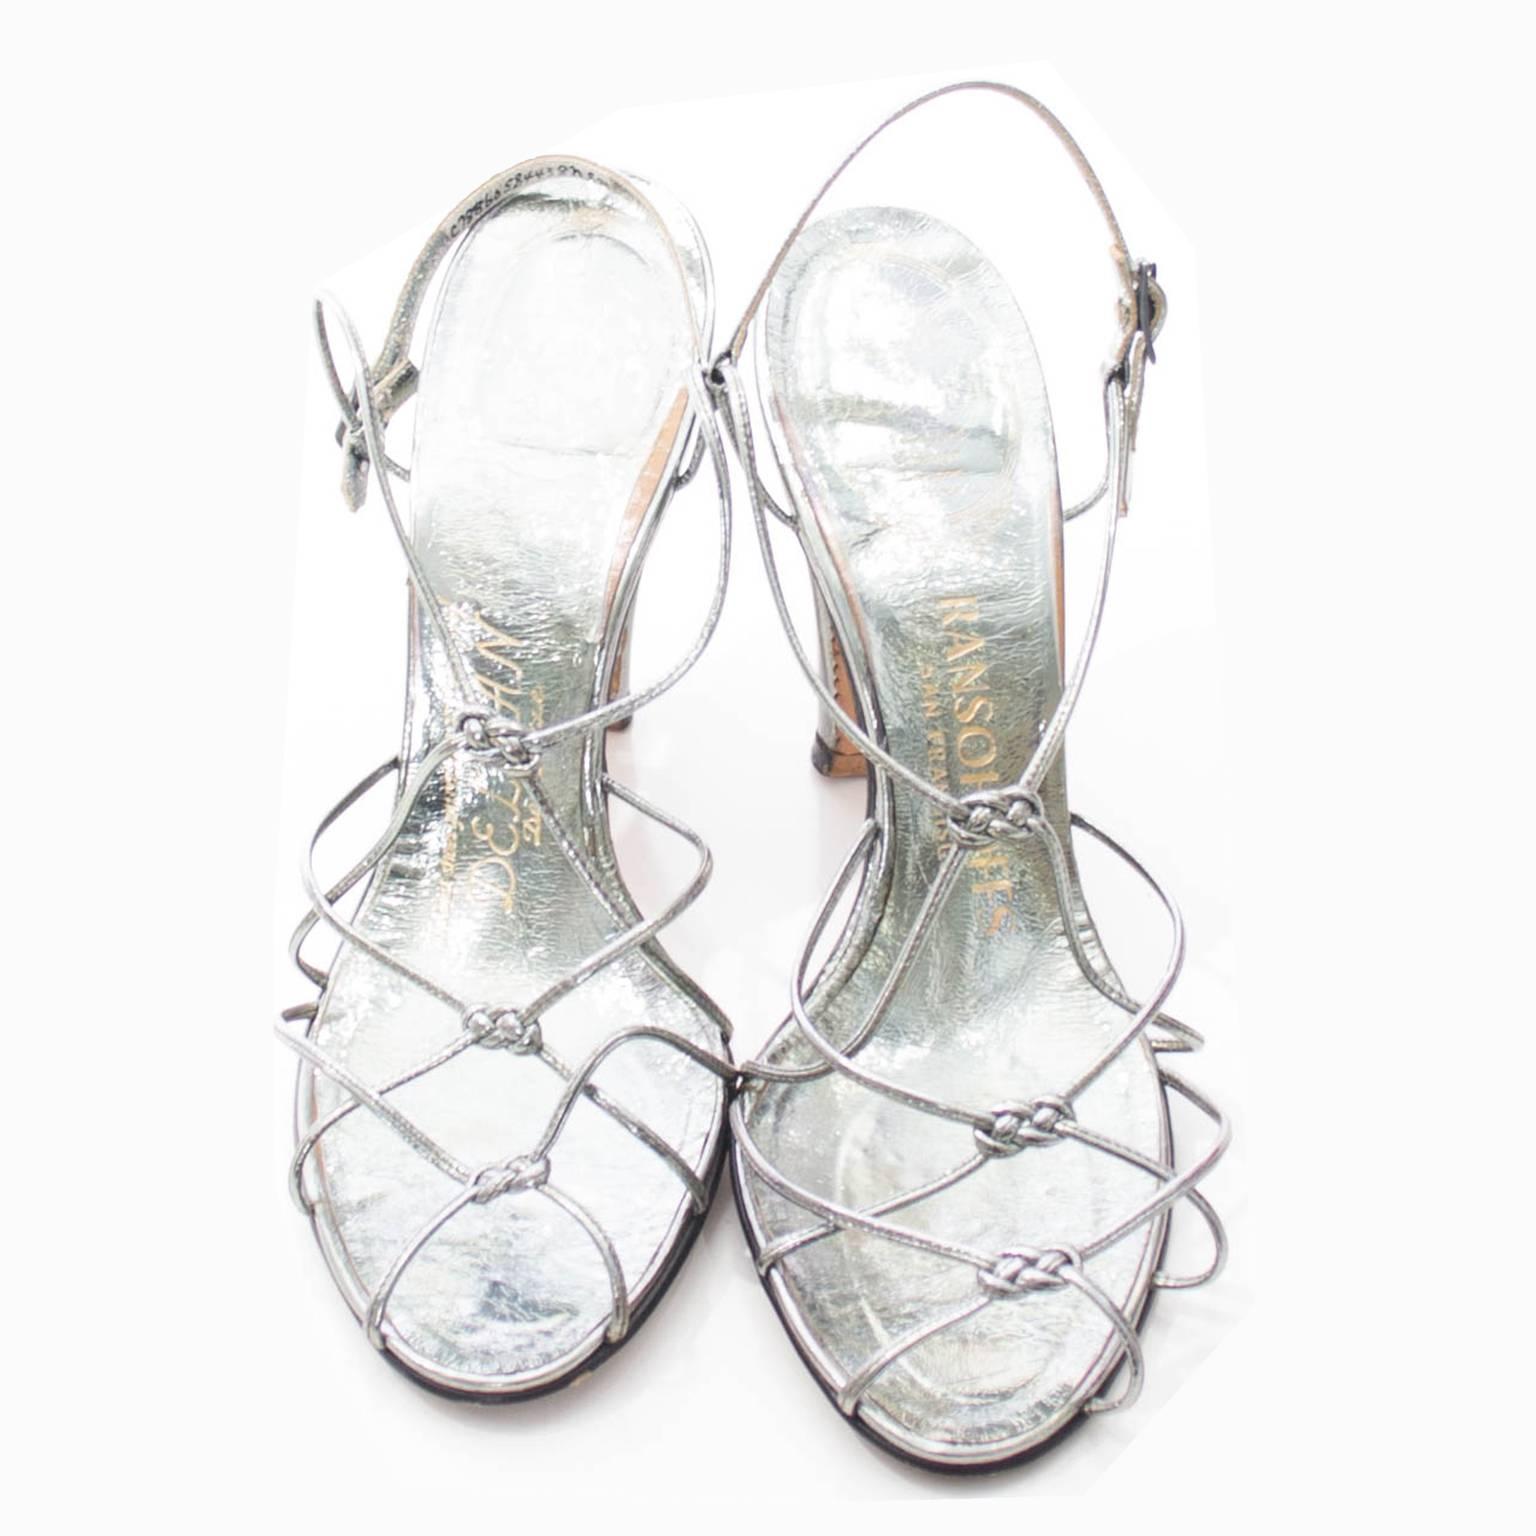 These are spectacular Delman de luxe metallic vintage shoes, purchased at Ransohoff's in San Francisco in the early 1950s. These are strappy silver leather shoes with fabulous knotted details. These measure just barely under 10 inches from the toe